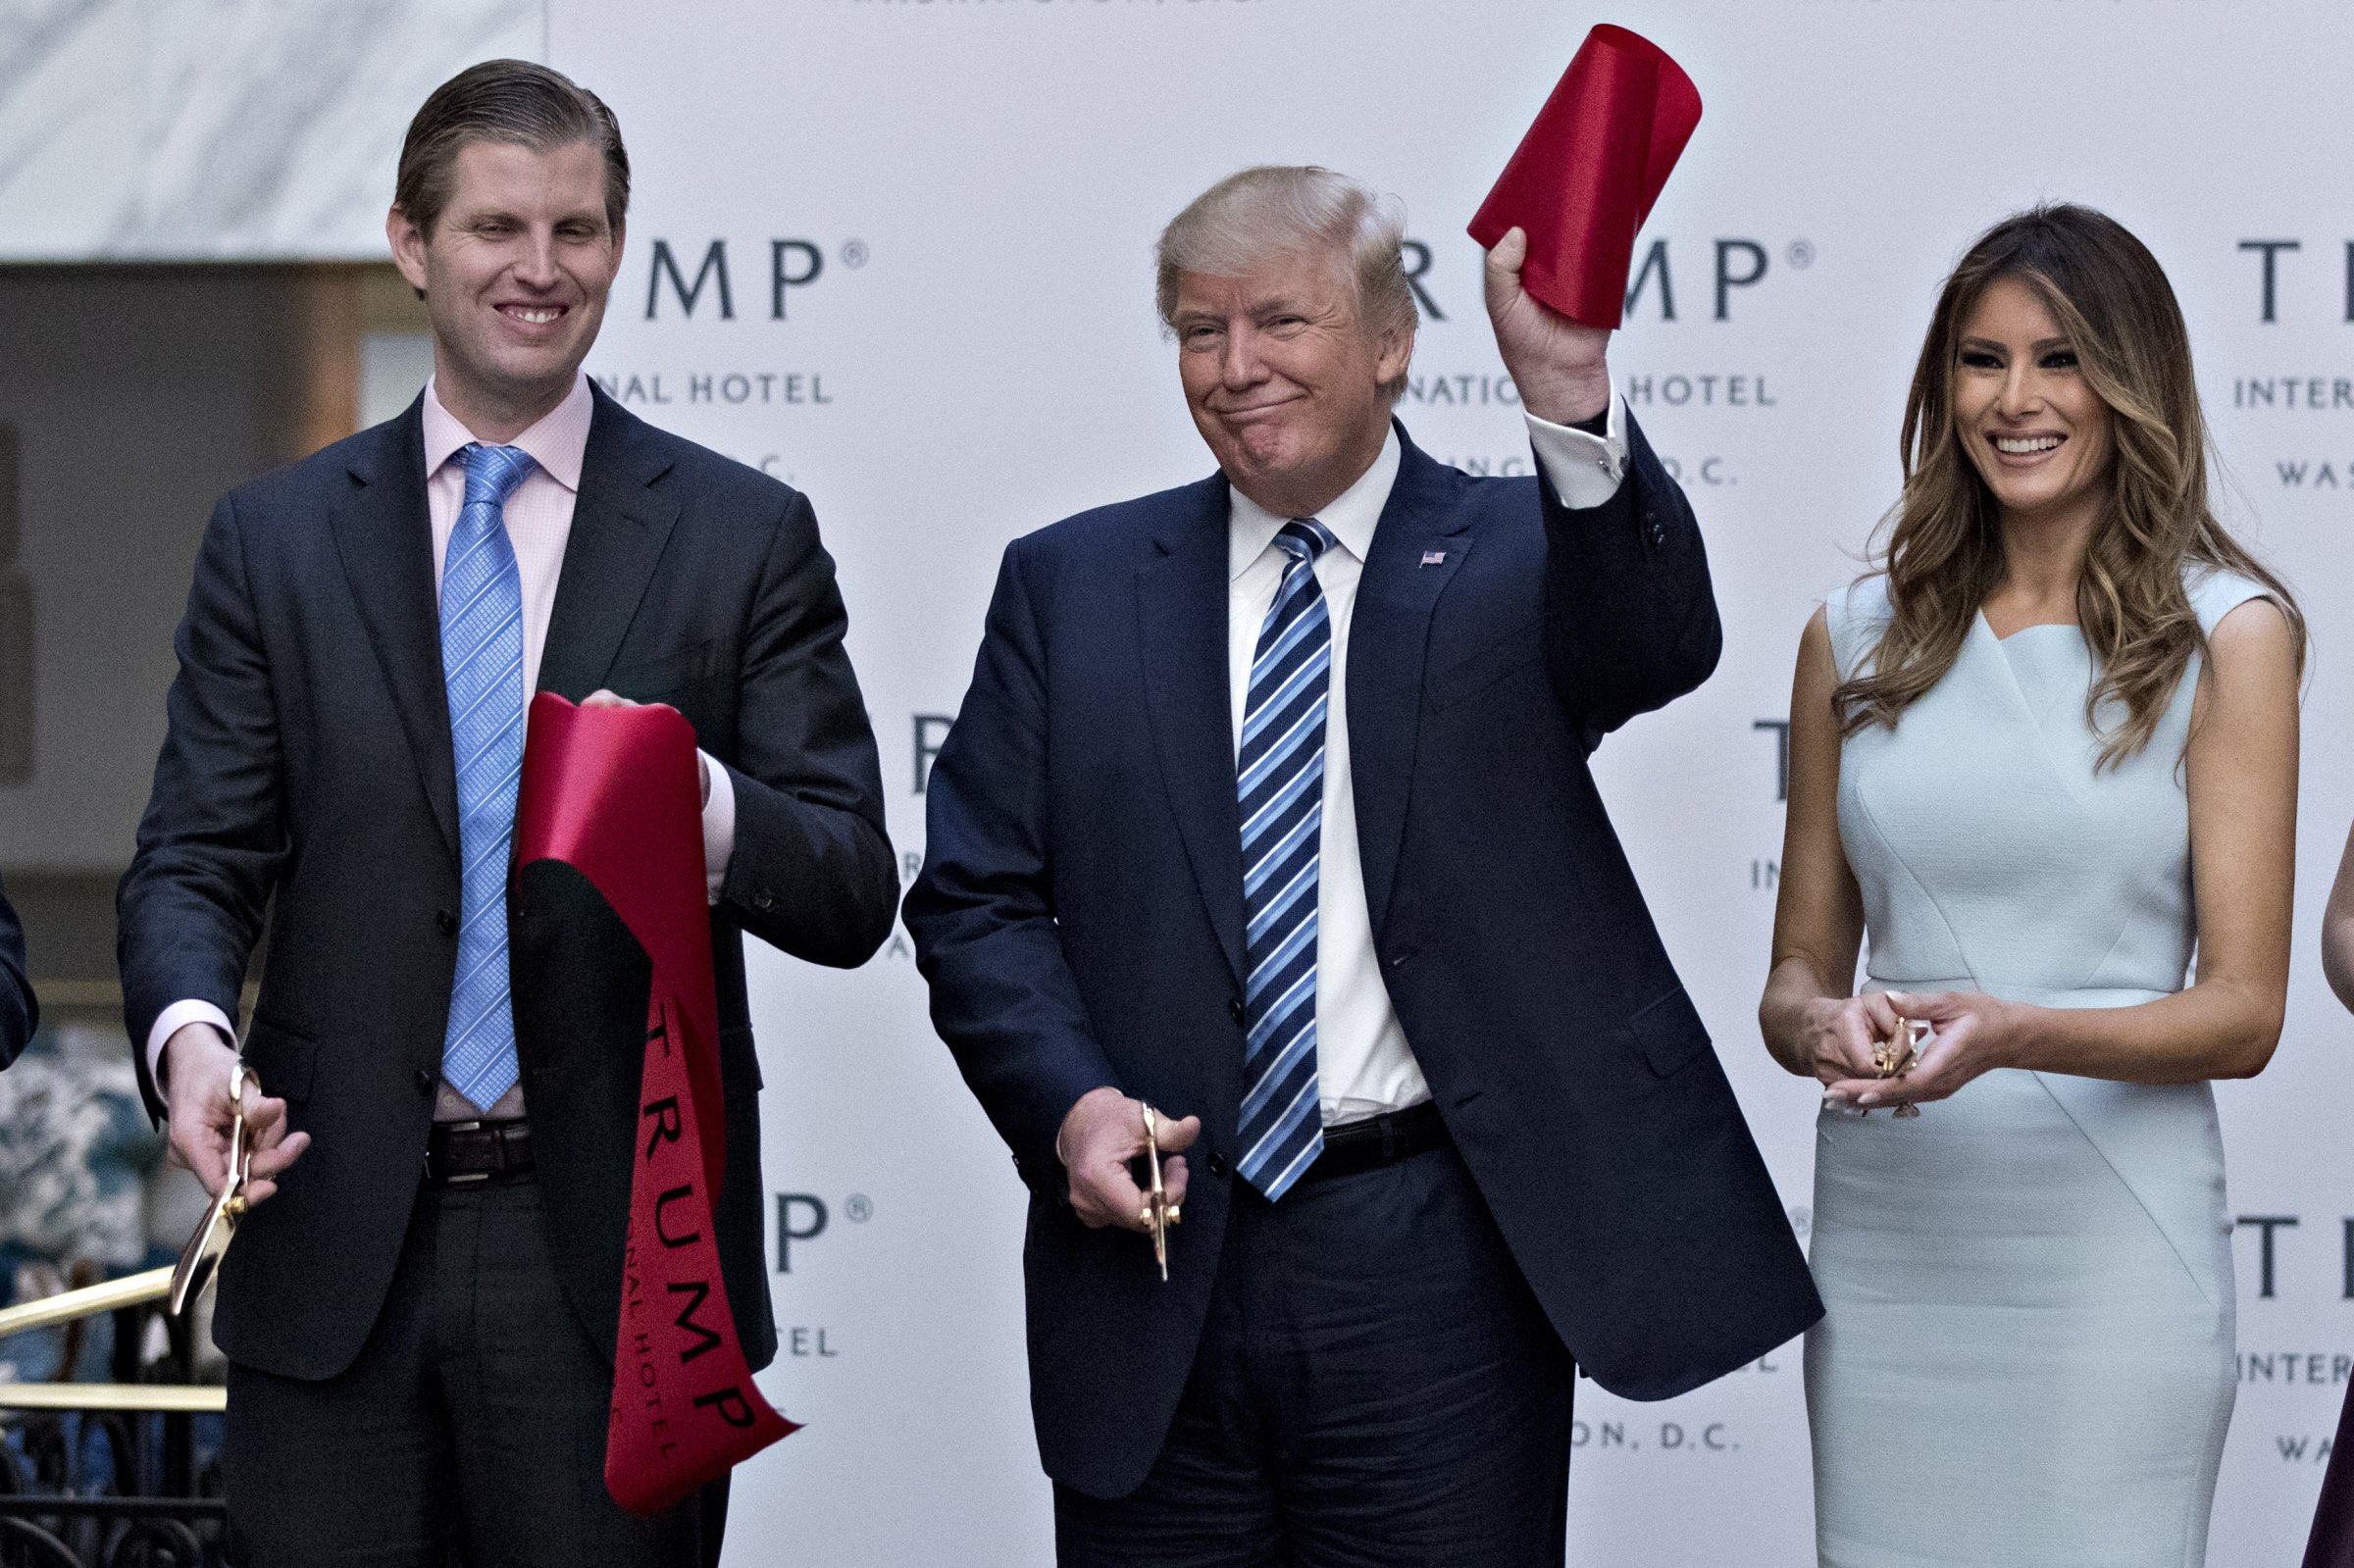 Donald Trump holds a piece of ribbon next to his wife Melania Trump, right, and his son Eric Trump during the grand opening ceremony of the Trump International Hotel in Washington, D.C., U.S., on Wednesday, Oct. 26, 2016.